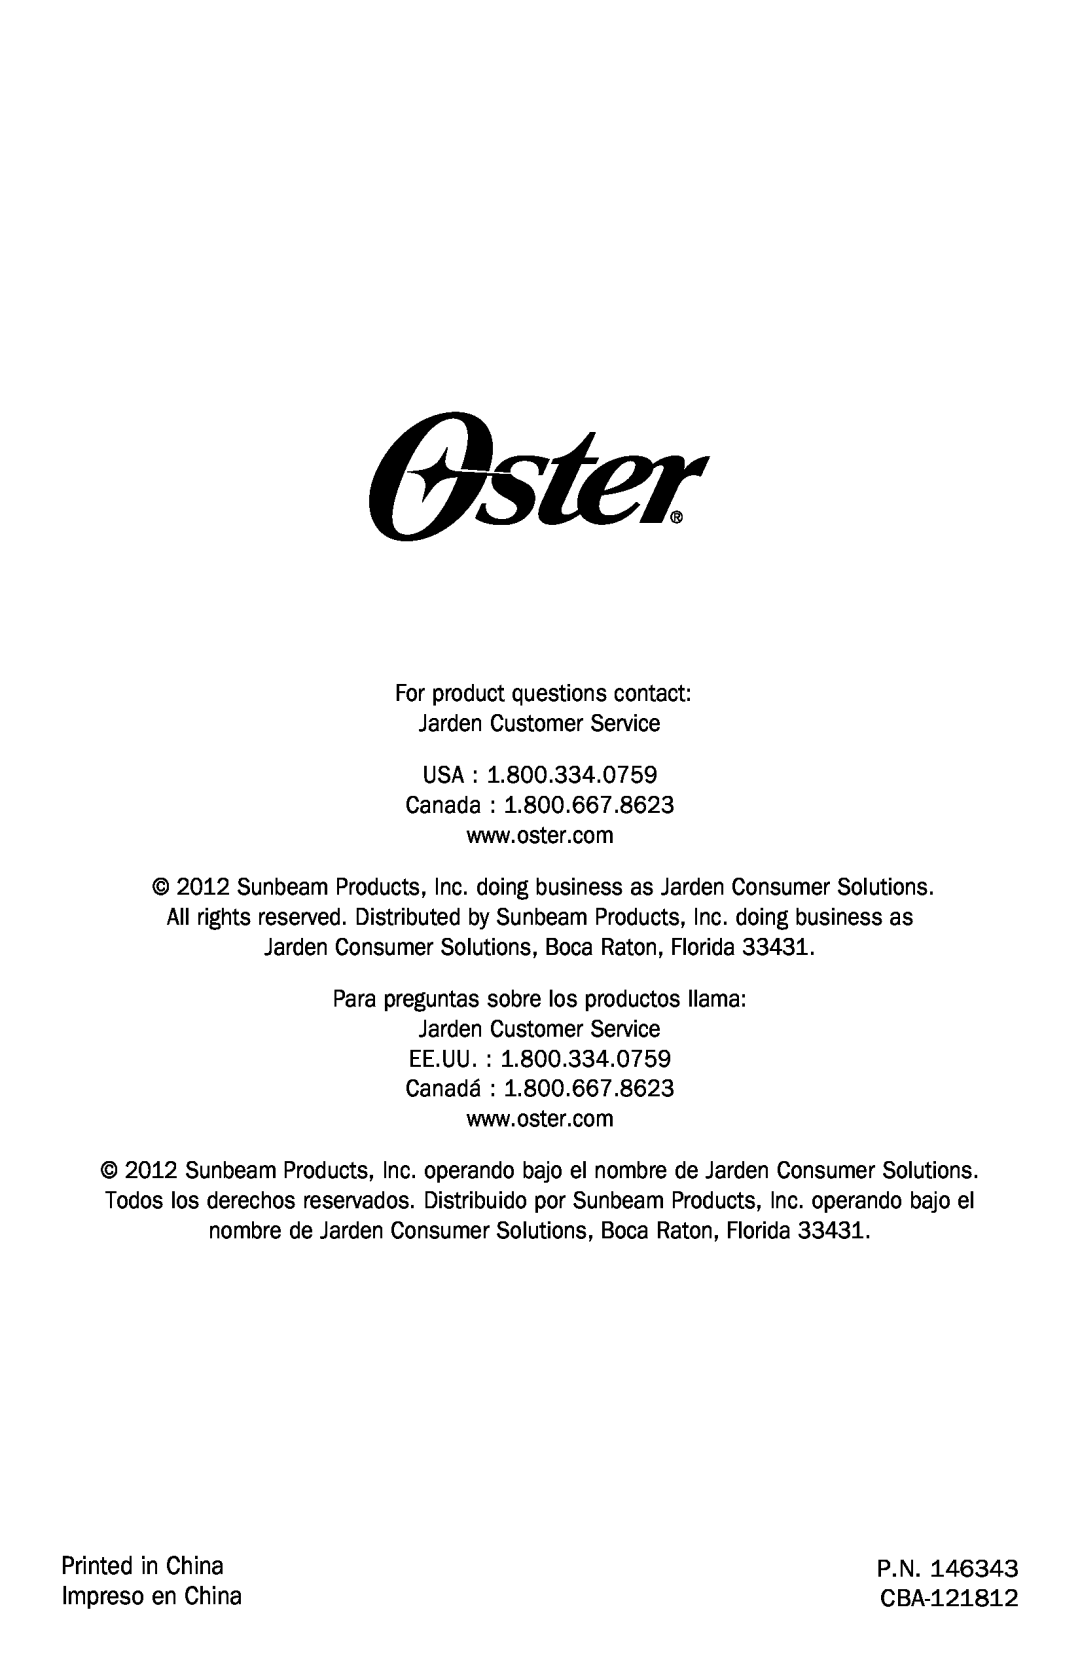 Oster TSSTTRWF2S user manual Impreso en China, For product questions contact, Jarden Customer Service USA Canada, P.N 